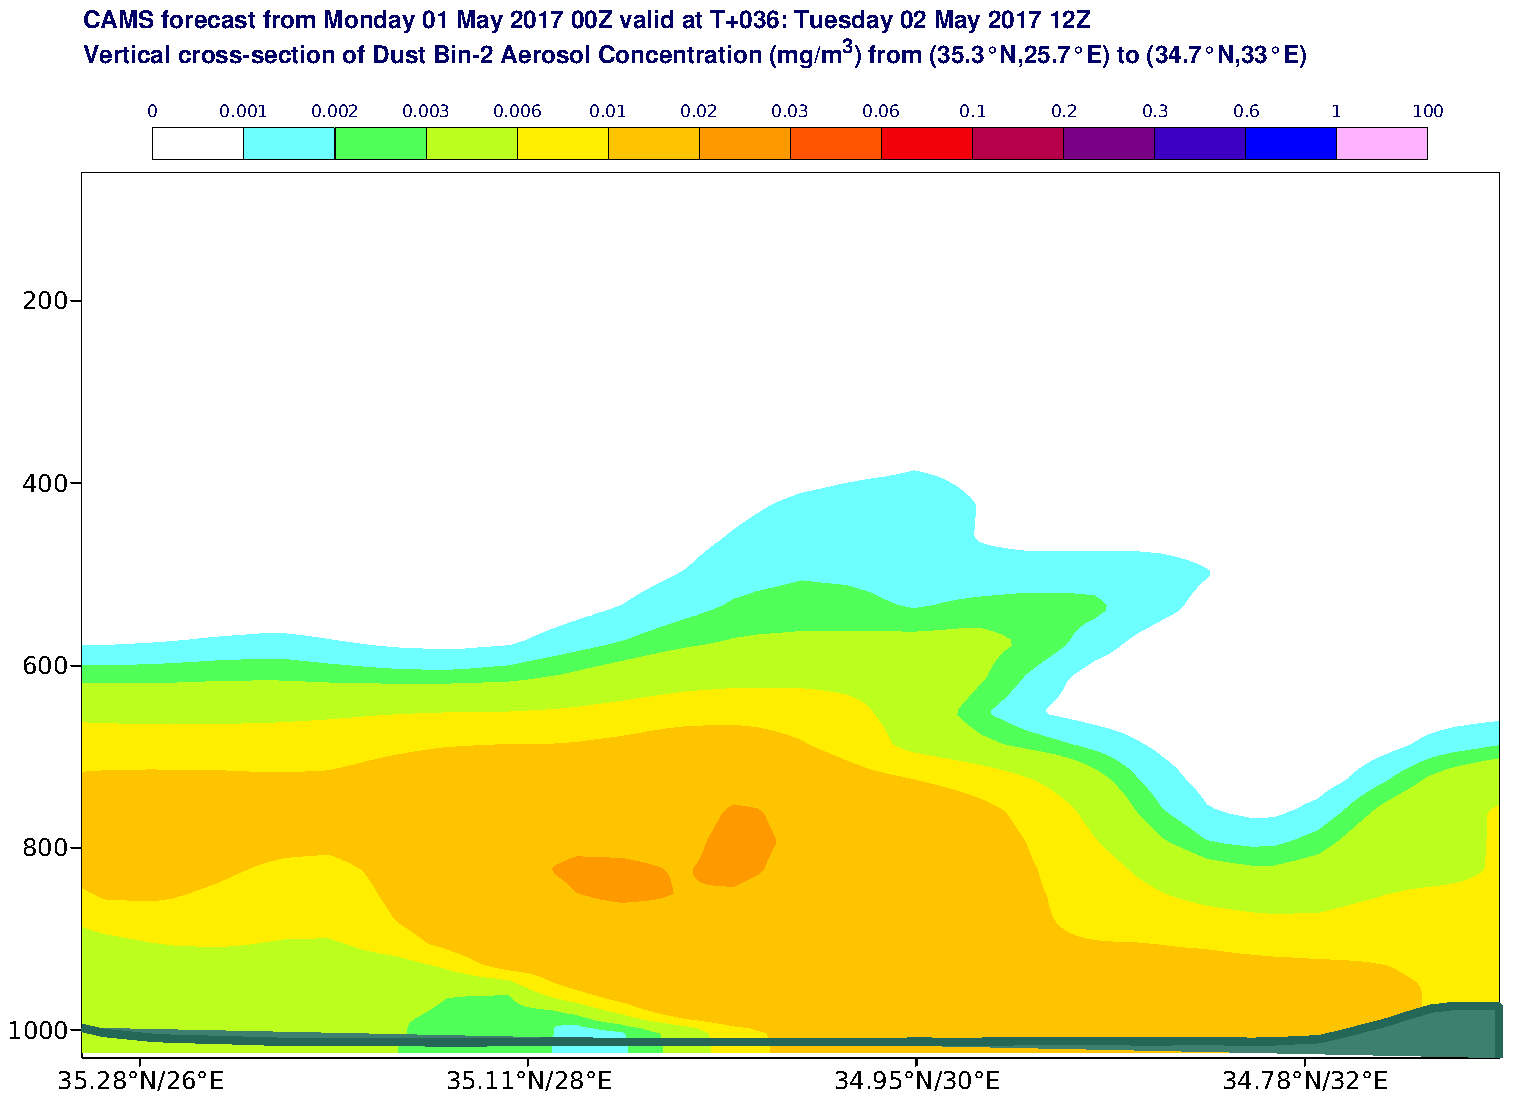 Vertical cross-section of Dust Bin-2 Aerosol Concentration (mg/m3) valid at T36 - 2017-05-02 12:00